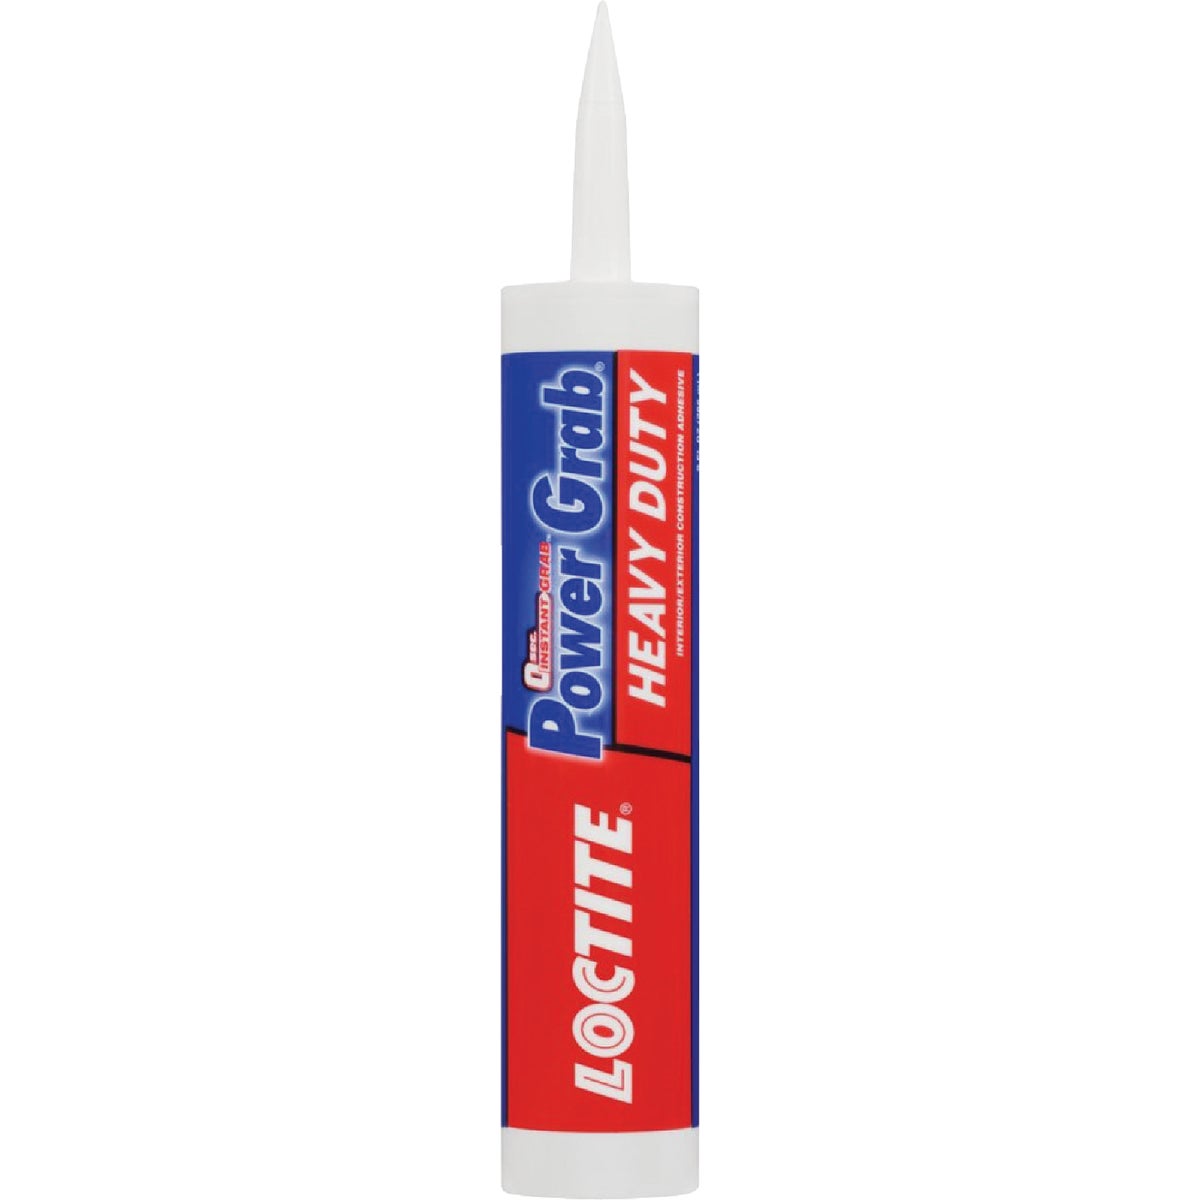 LOCTITE Power Grab Express 9 Oz. Heavy Duty Construction Adhesive